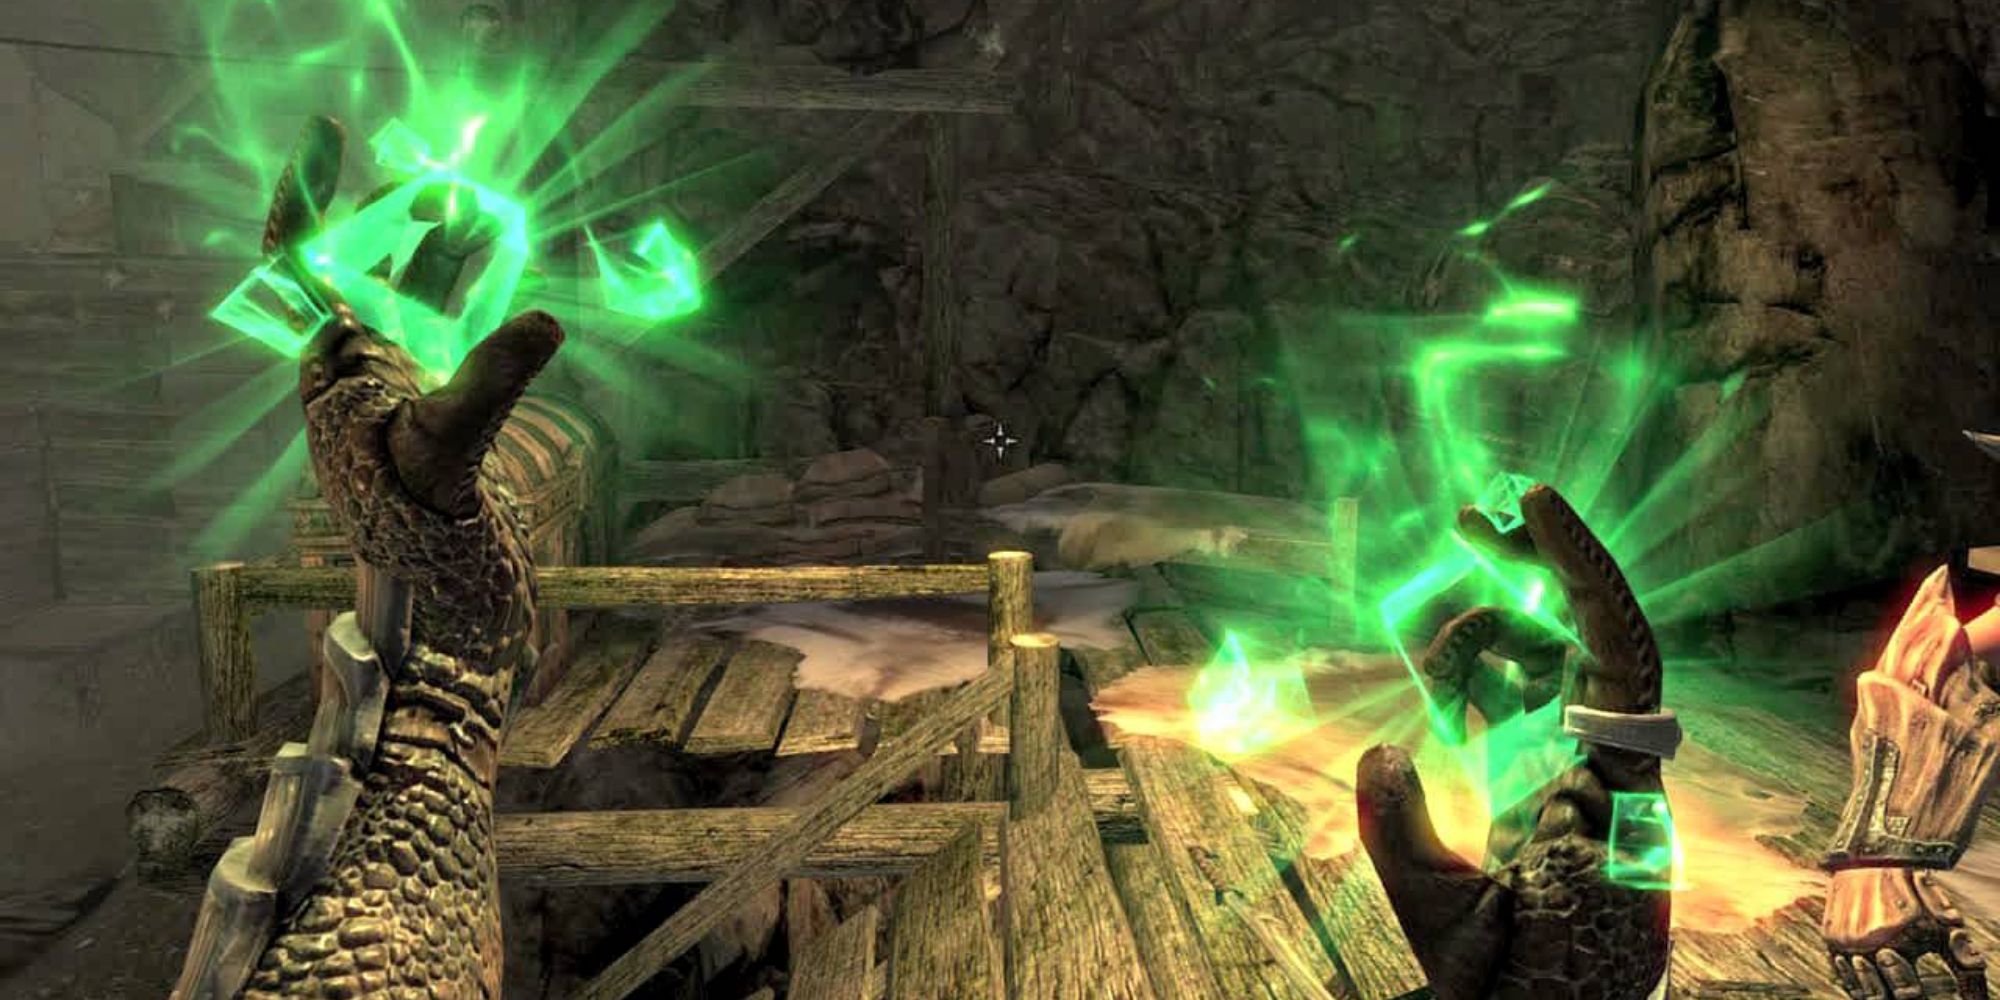 Skyrim casting transmute spell in first person